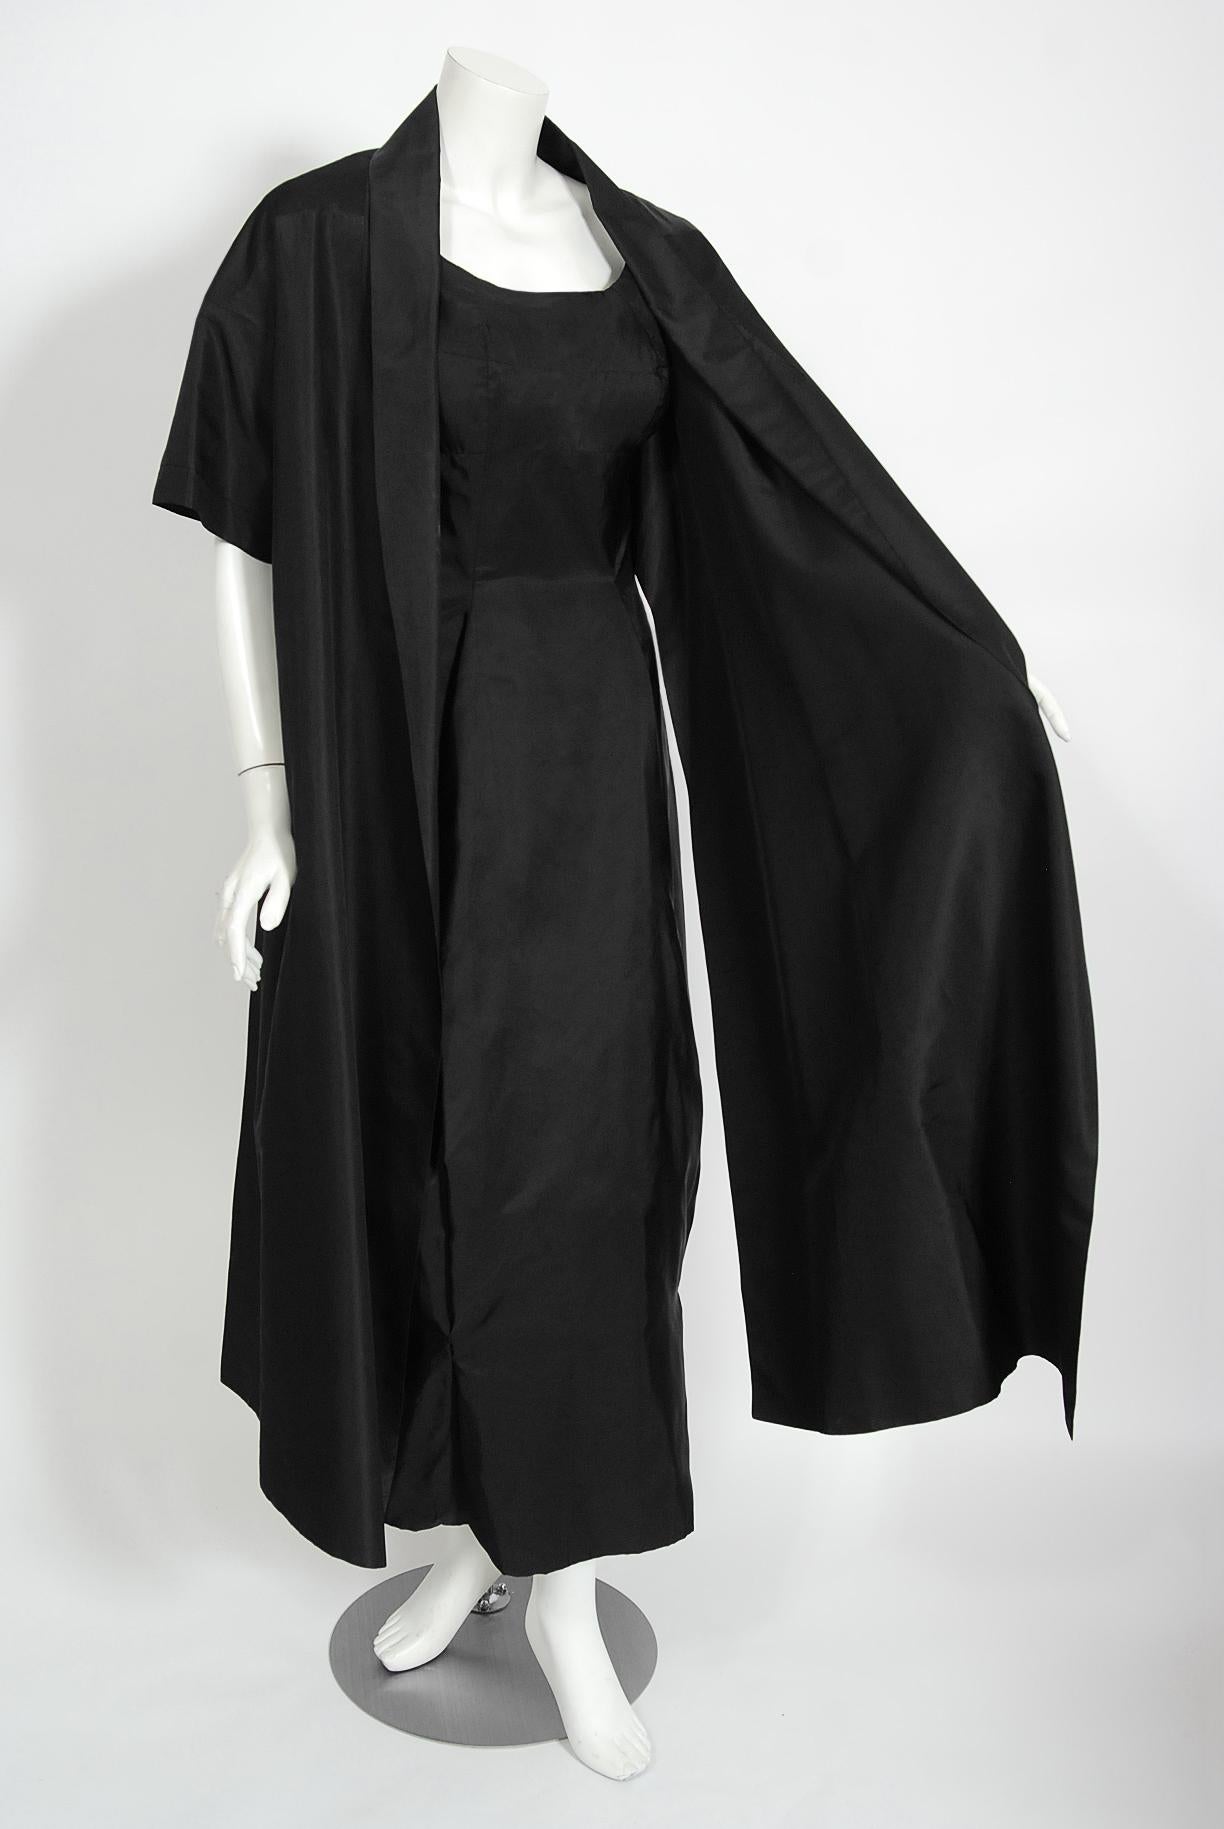 Gorgeous and incredibly rare Madame Grès haute couture sculpted black silk dress ensemble dating back to the early 1950's. Madame Grès felt that the true job of the couturier was not to create a name for one's self, as many designers do, but to pay